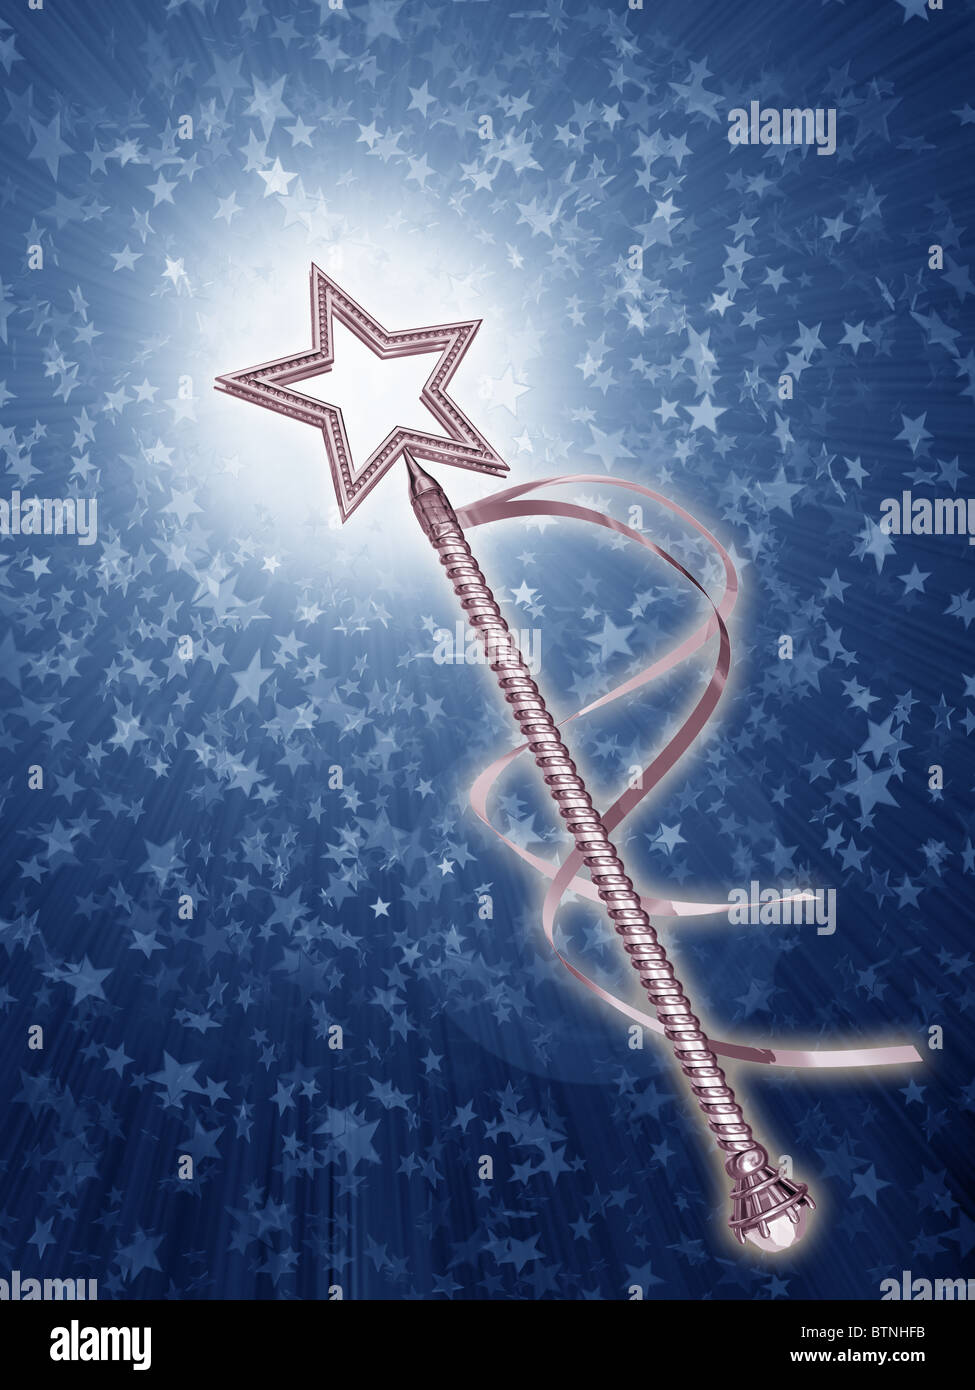 Illustration of a platinum fairy wand on a starry background Stock Photo